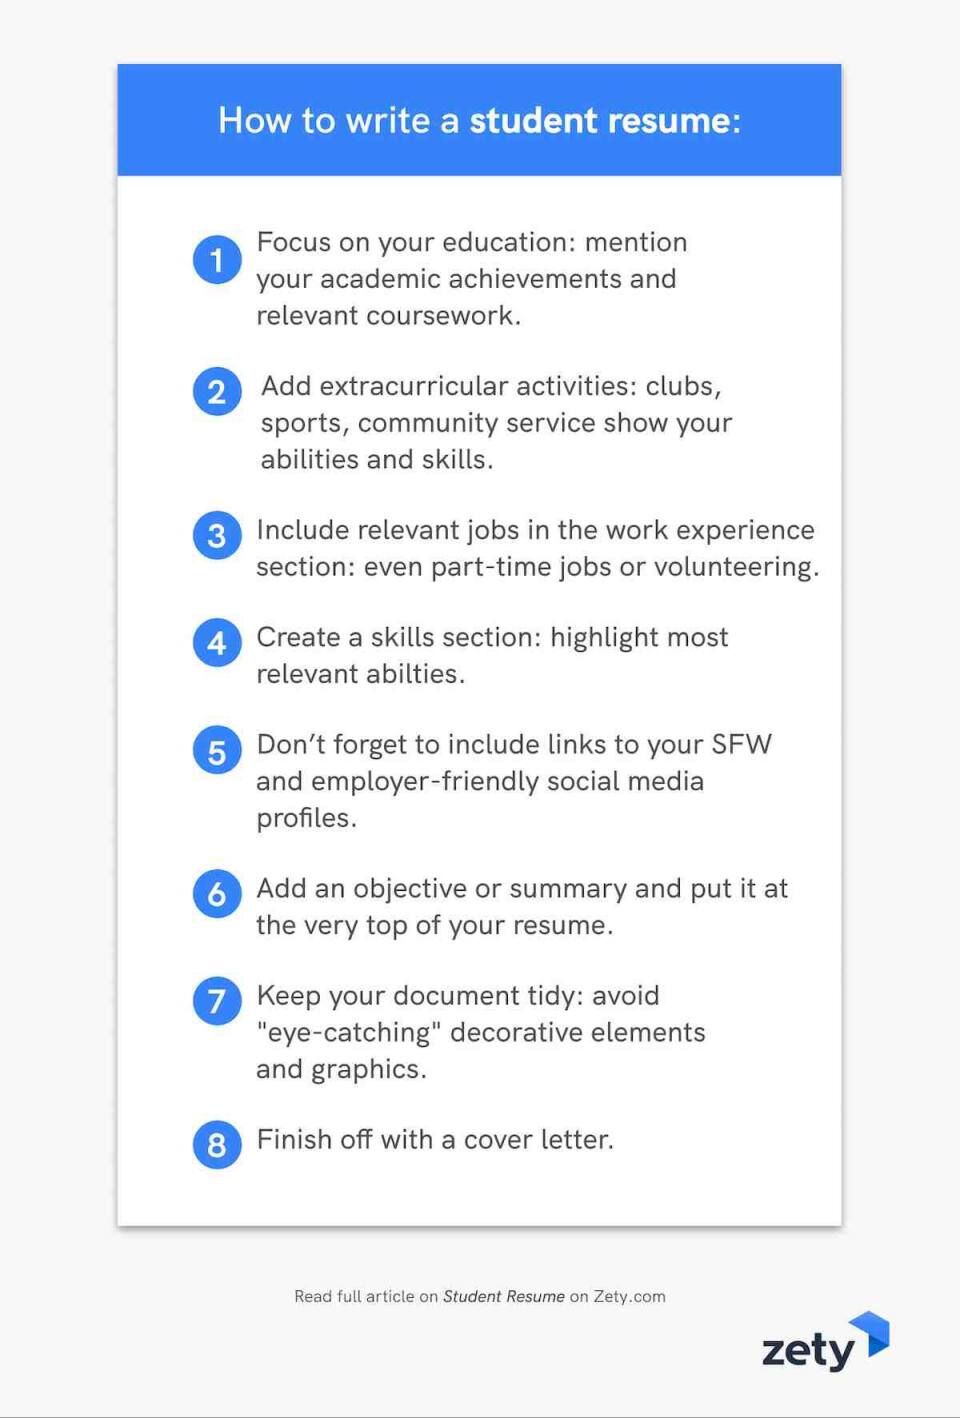 How to write a student resume